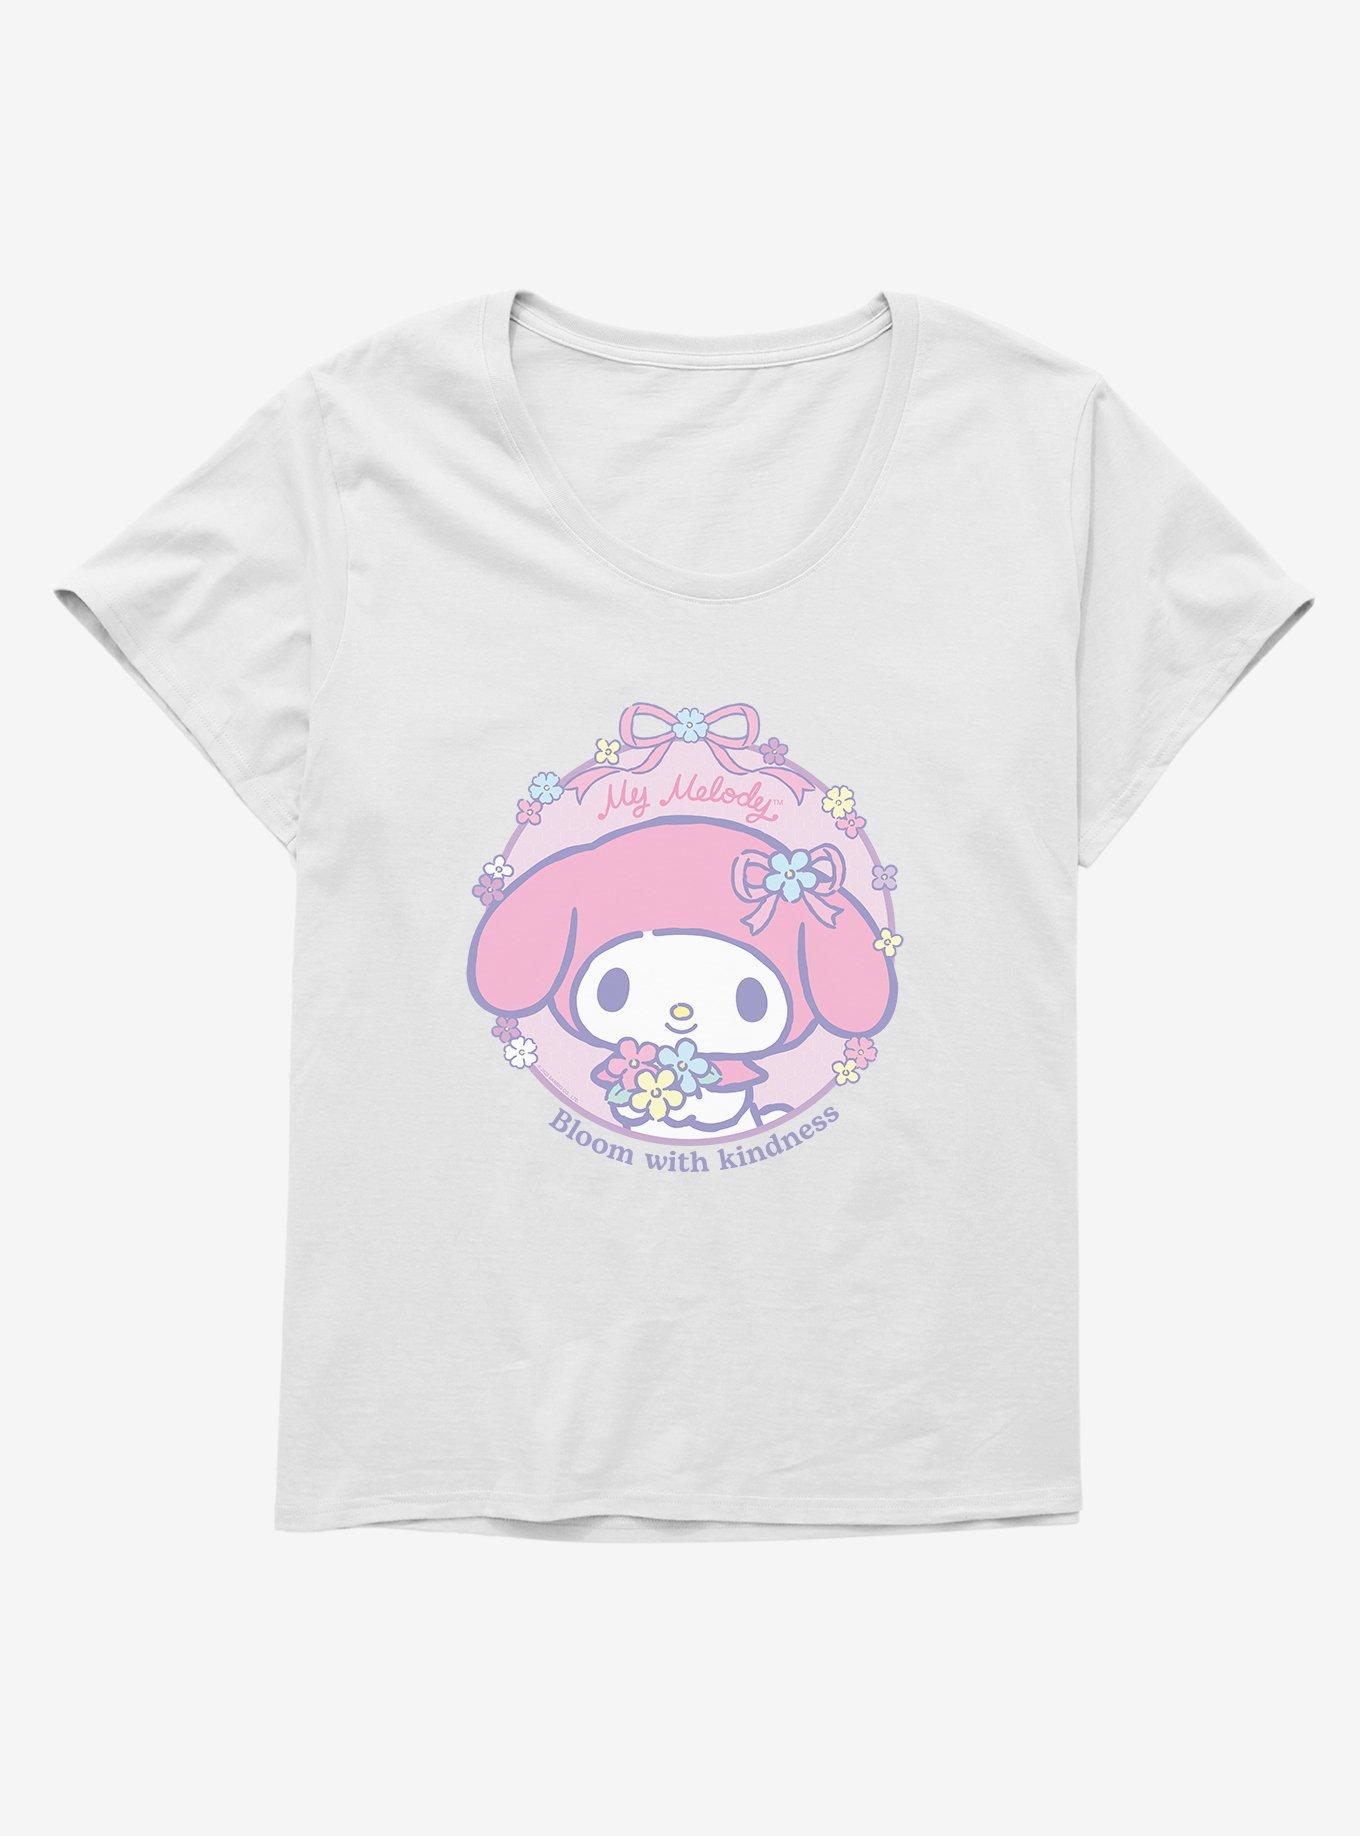 My Melody Bloom With Kindness Girls T-Shirt Plus Size, WHITE, hi-res